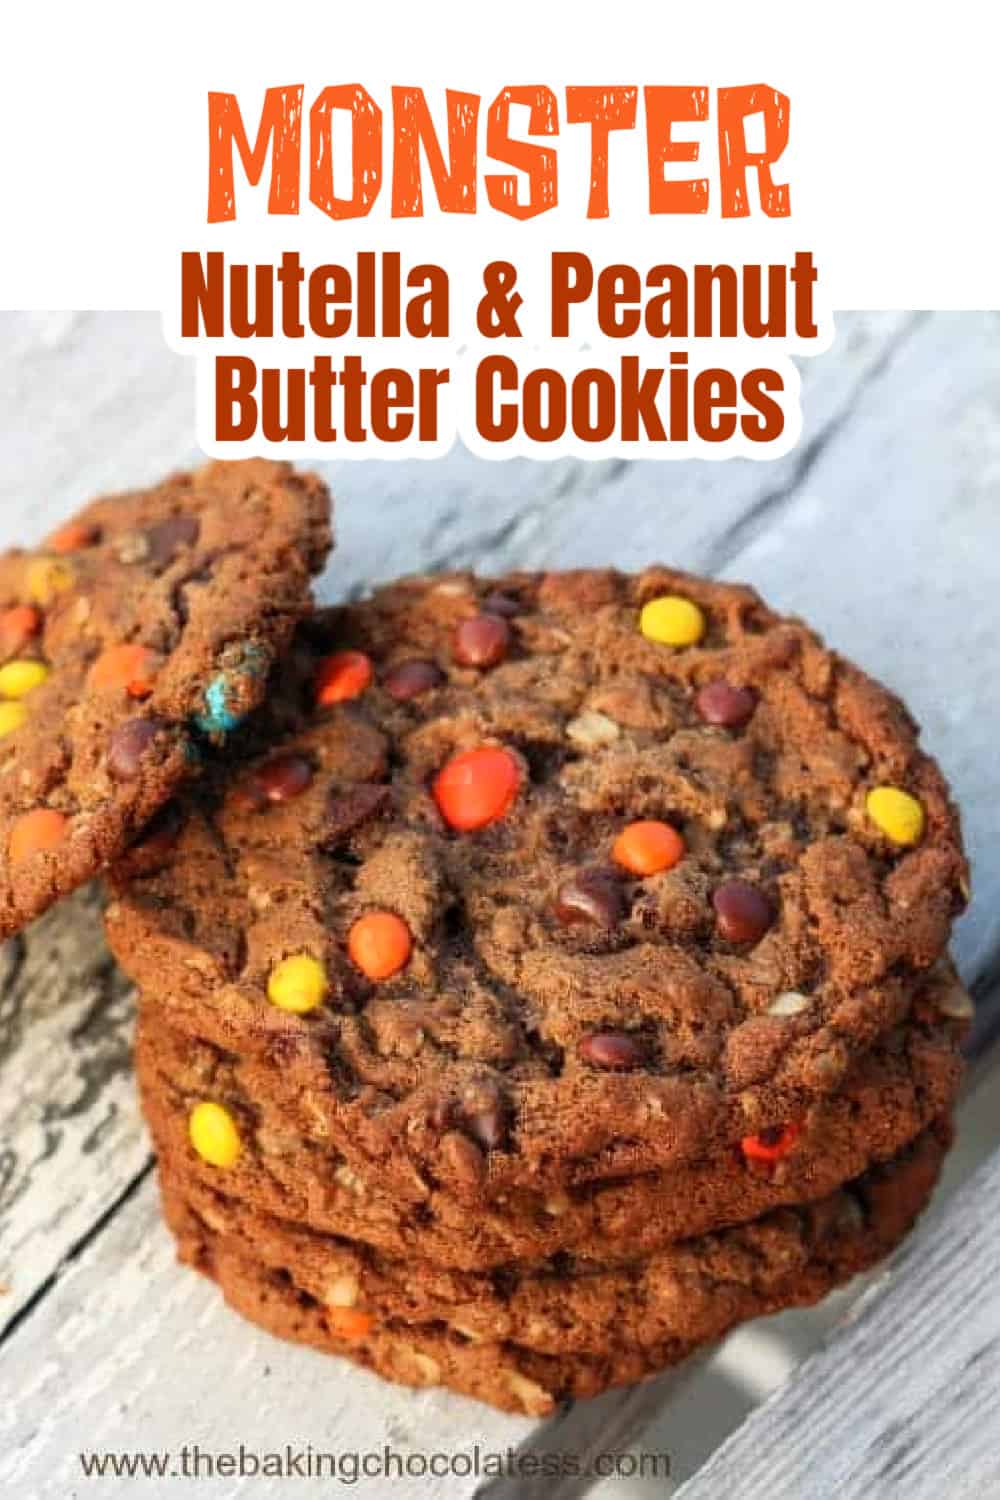 Monster Nutella & Peanut Butter Cookies